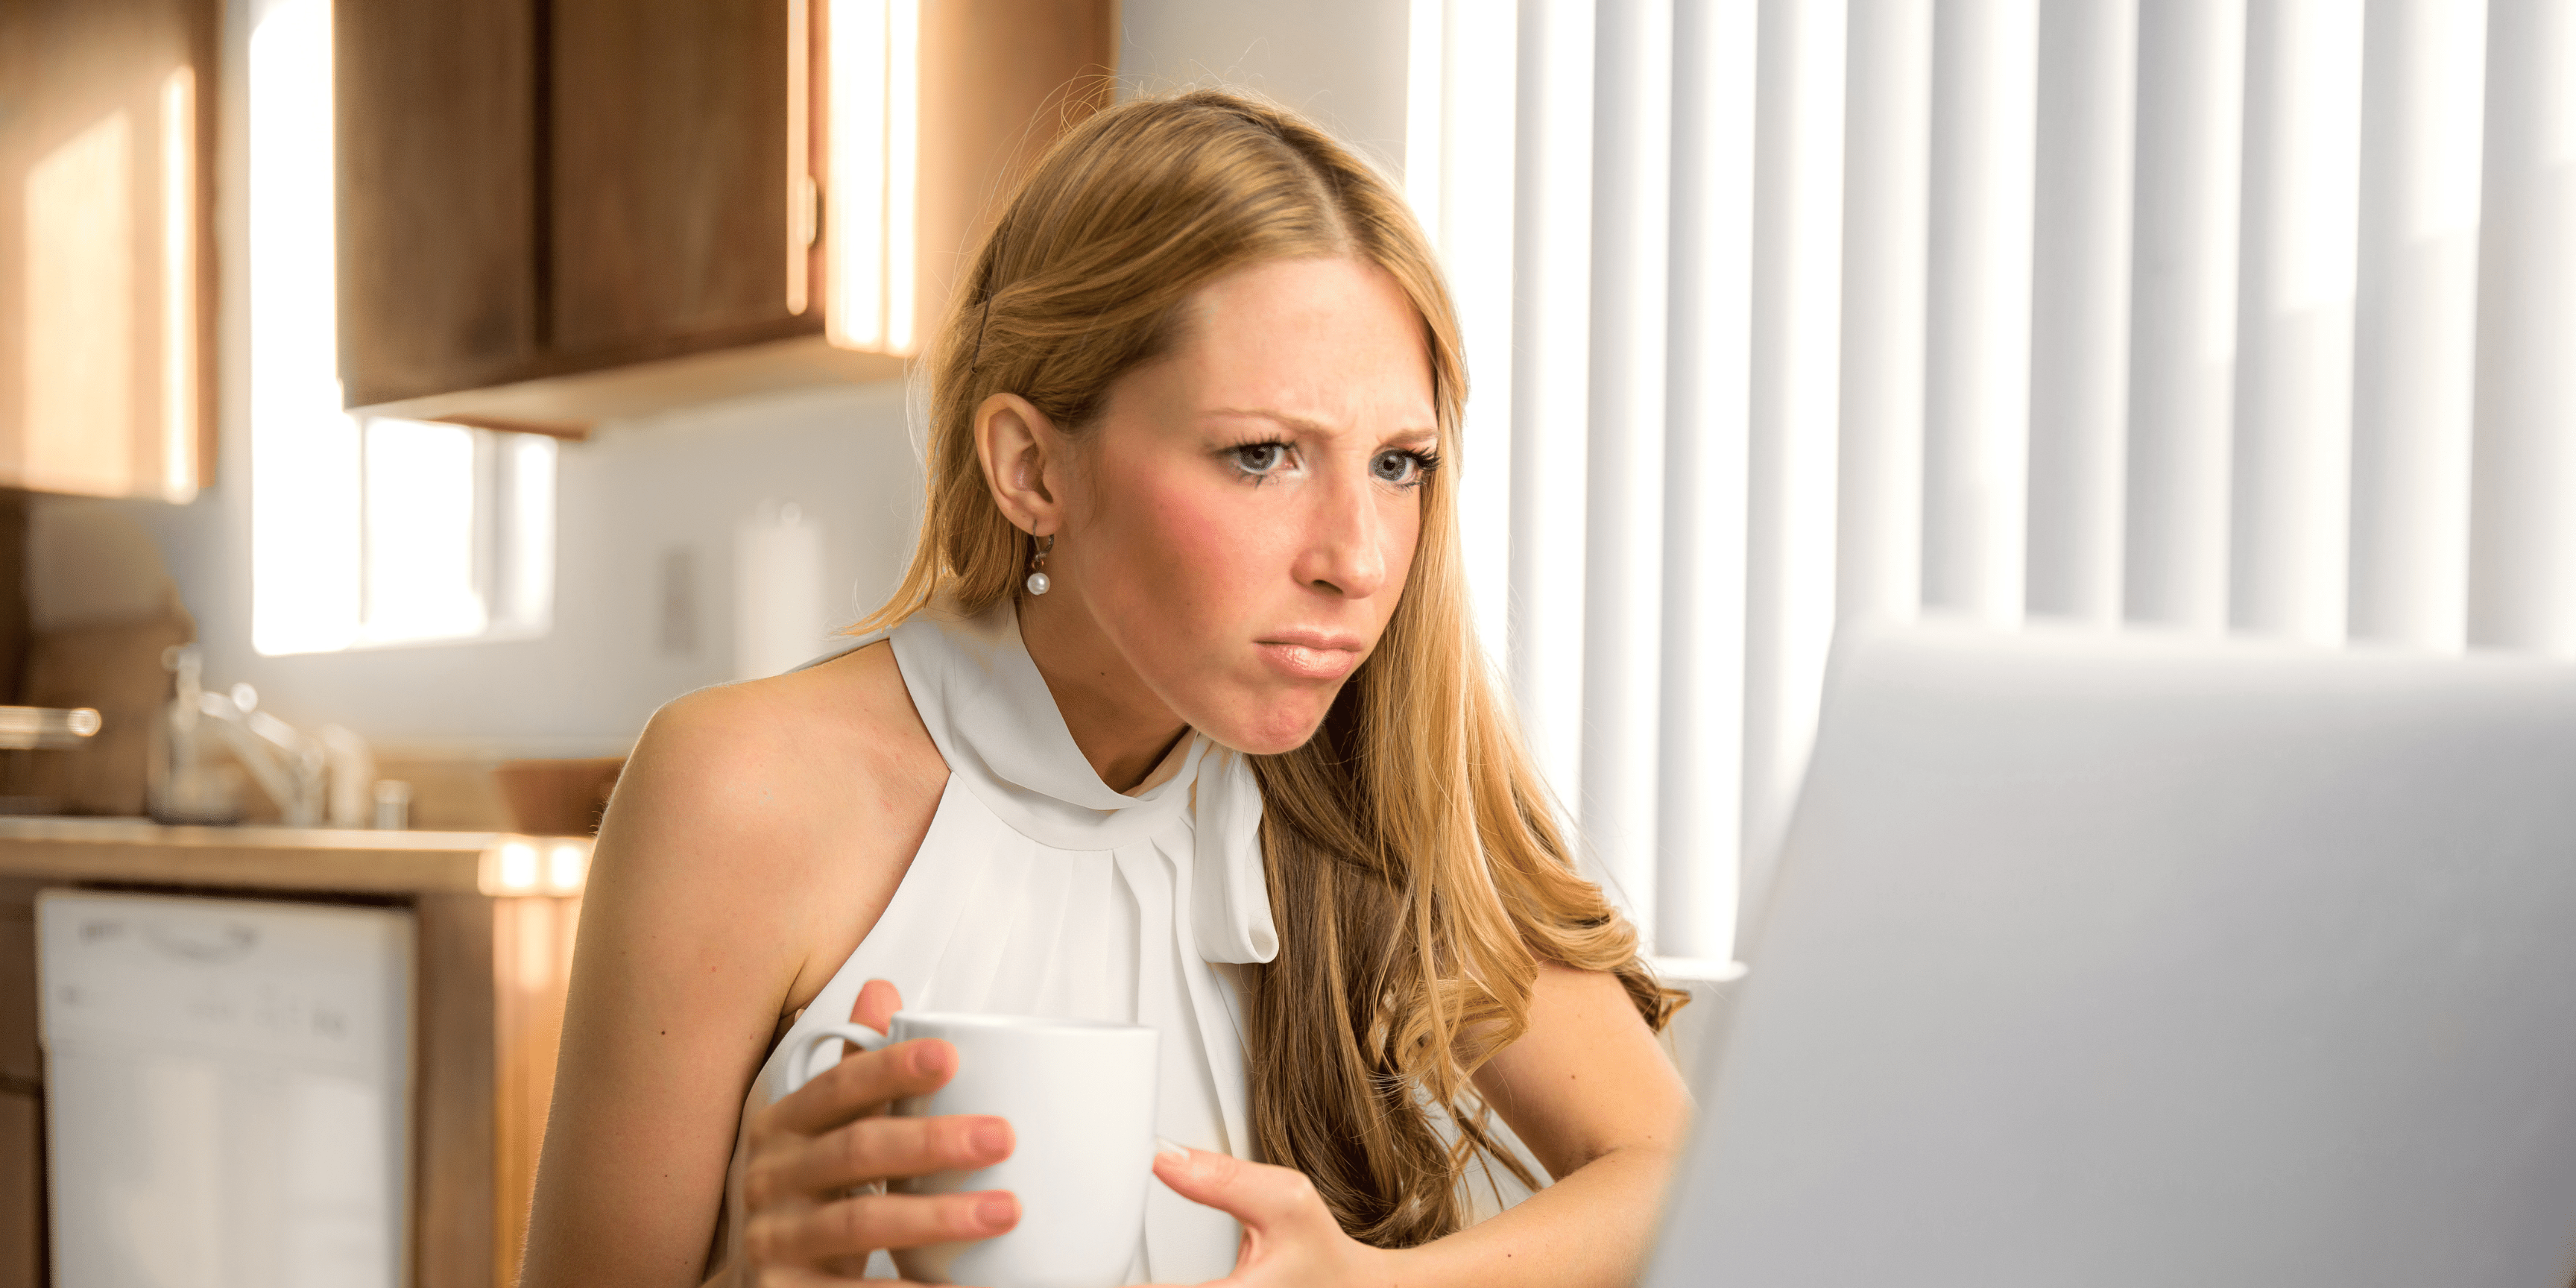 perplexed young woman looking at computer